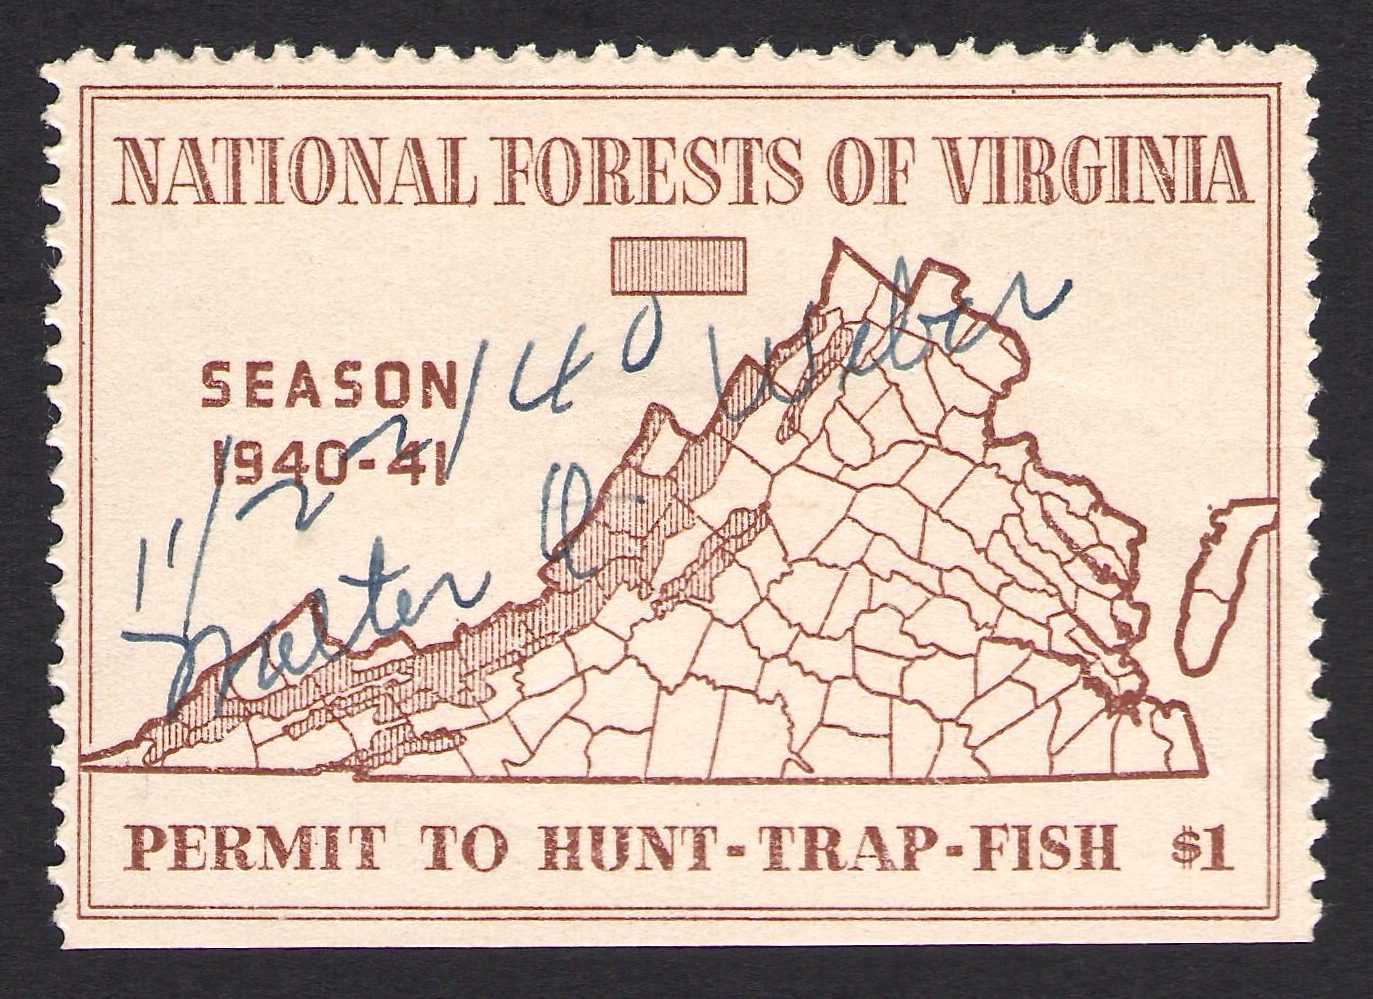 1940-41 National Forest Virginia